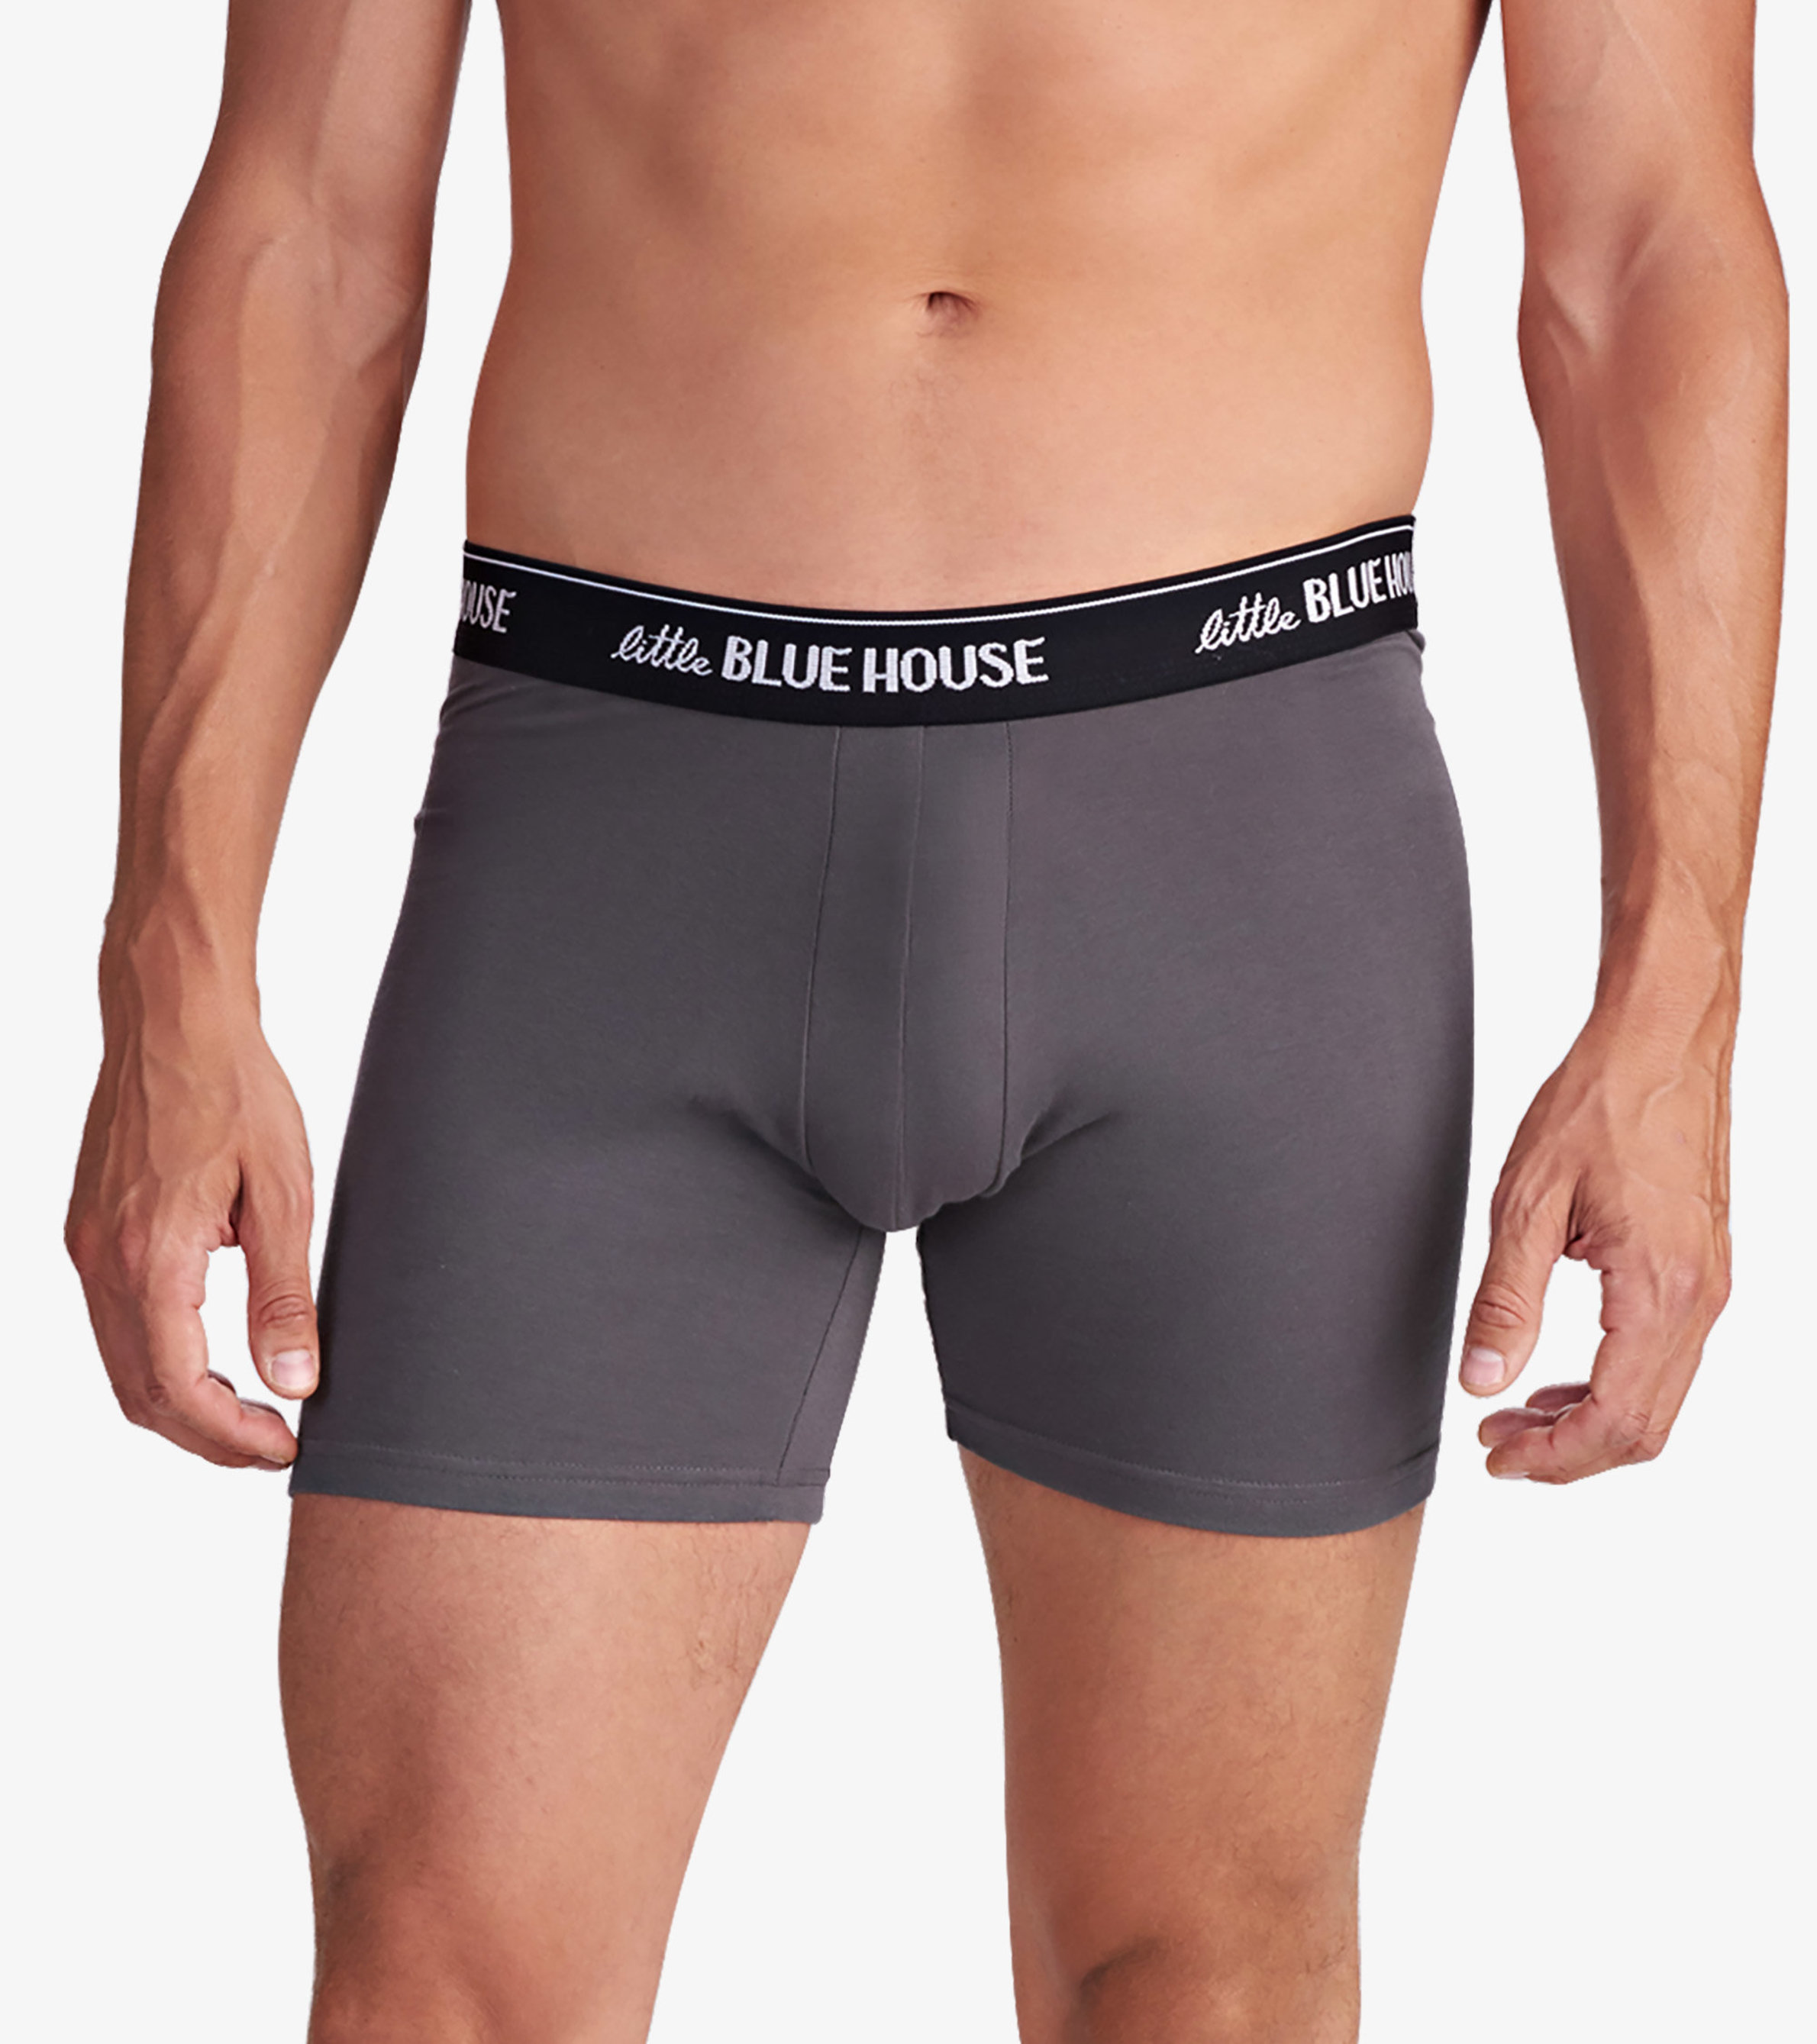 Mens Boxer Shorts Suppliers 19164728  Wholesale Manufacturers and  Exporters